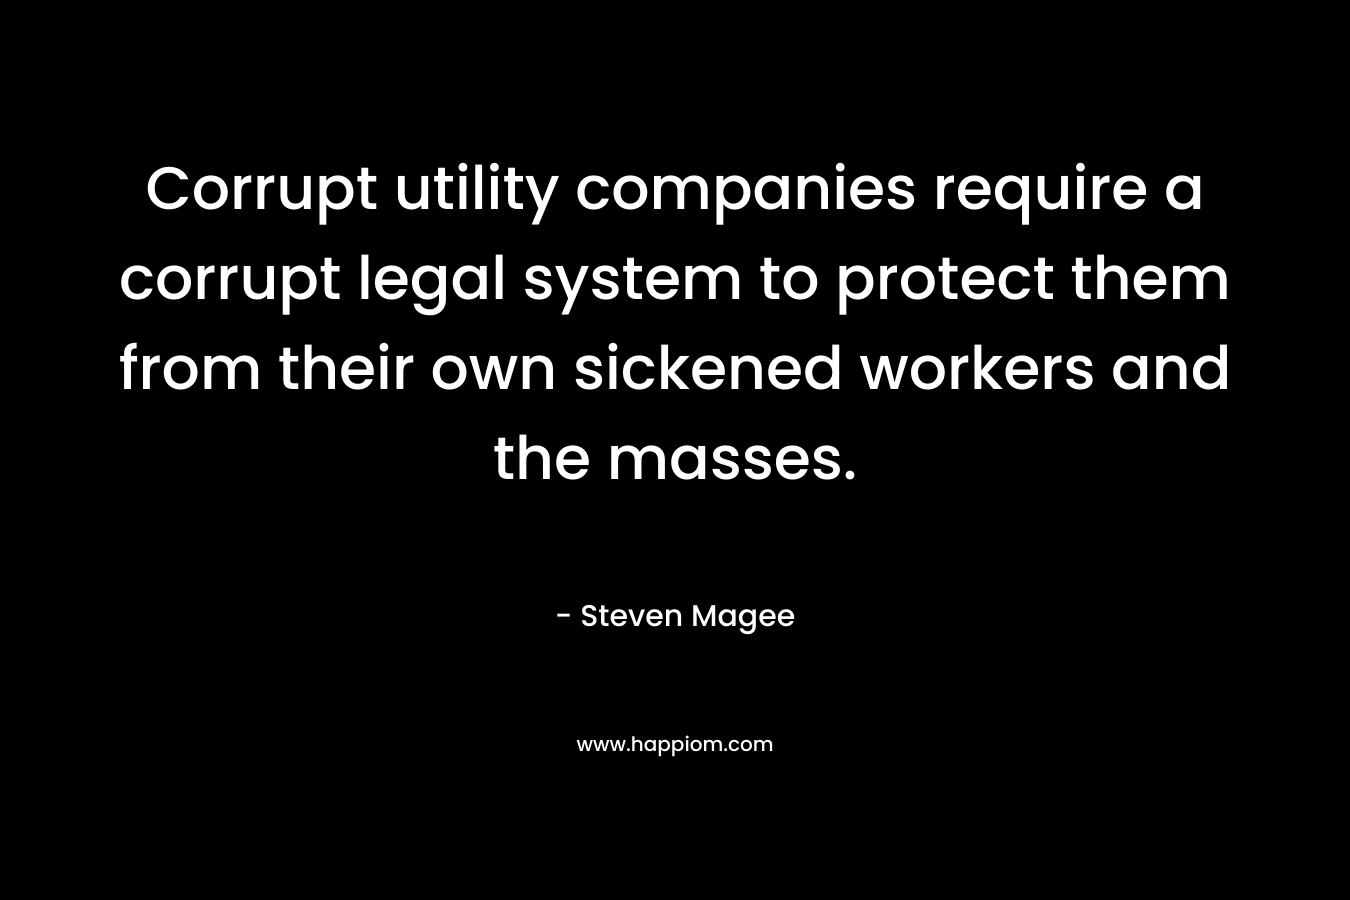 Corrupt utility companies require a corrupt legal system to protect them from their own sickened workers and the masses.